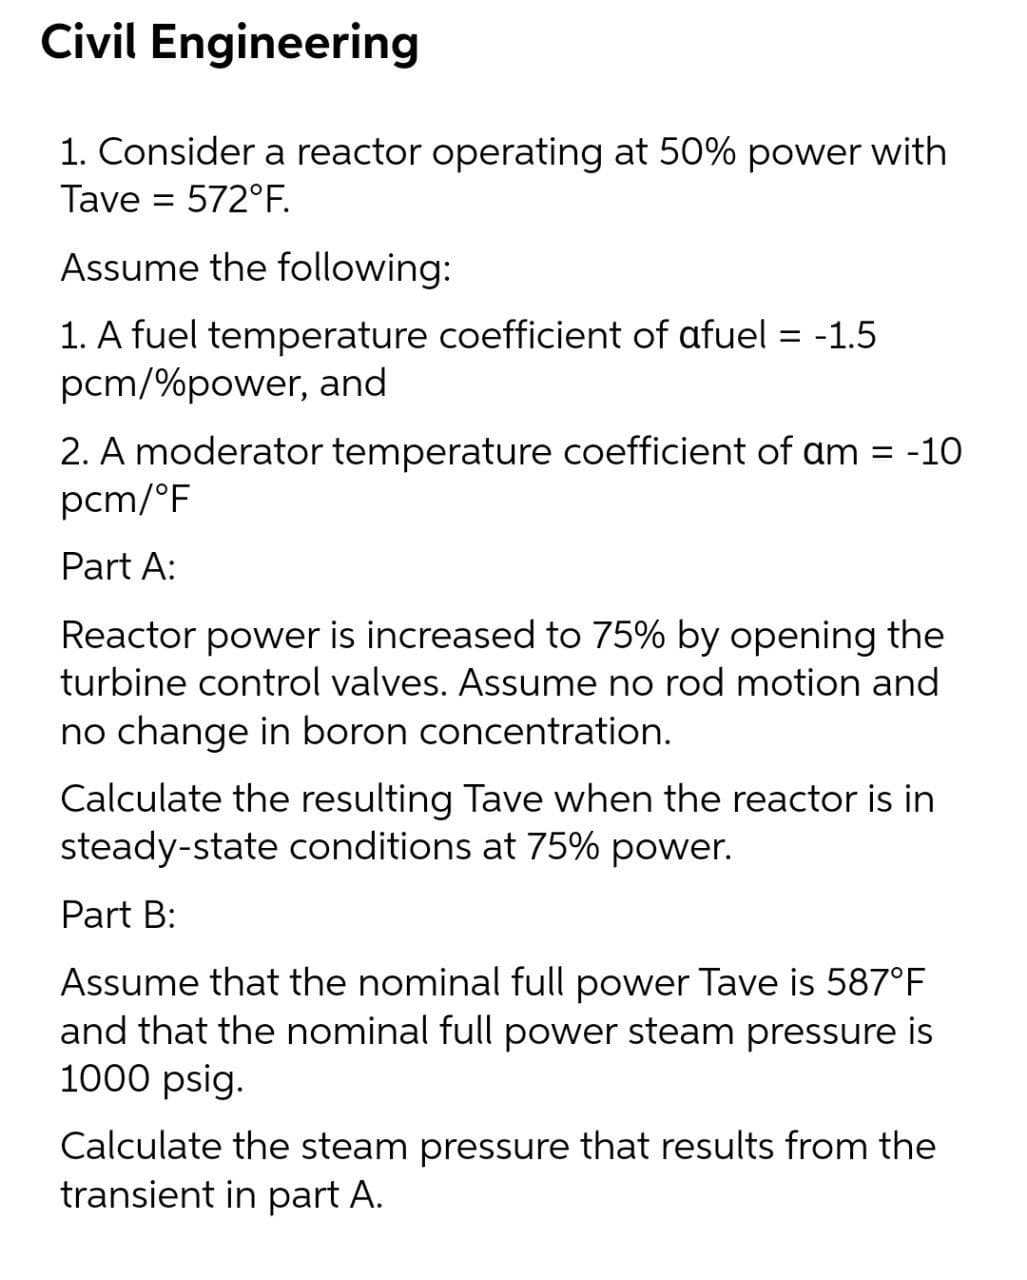 Civil Engineering
1. Consider a reactor operating at 50% power with
Tave = 572°F.
Assume the following:
1. A fuel temperature coefficient of afuel = -1.5
pcm/%power, and
2. A moderator temperature coefficient of am = -10
pcm/°F
Part A:
Reactor power is increased to 75% by opening the
turbine control valves. Assume no rod motion and
no change in boron concentration.
Calculate the resulting Tave when the reactor is in
steady-state conditions at 75% power.
Part B:
Assume that the nominal full power Tave is 587°F
and that the nominal full power steam pressure is
1000 psig.
Calculate the steam pressure that results from the
transient in part A.
